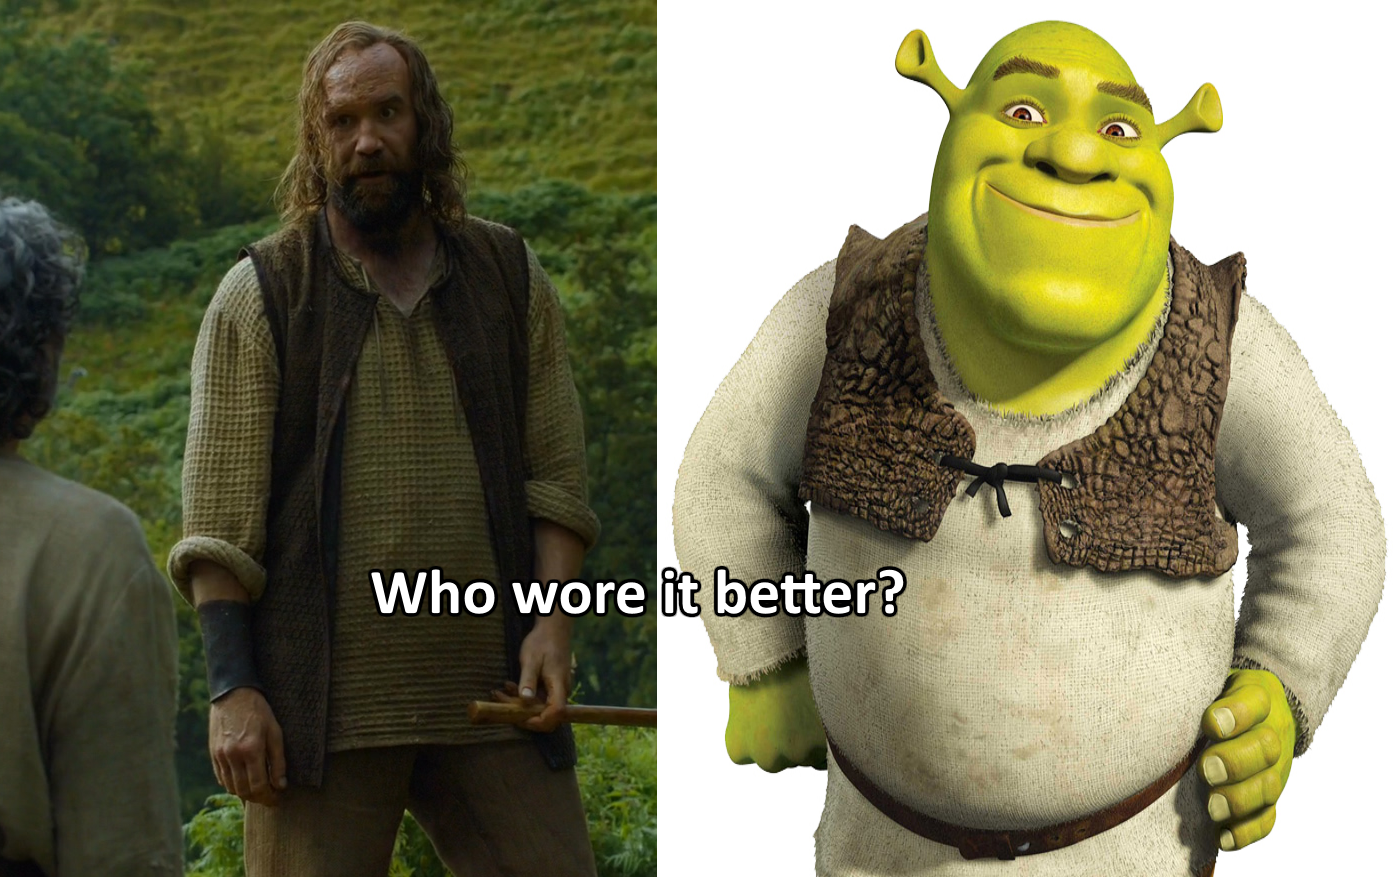 Who wore it better, Shrek or The Hound from Game of Thrones - typical peasant outfit and vest.